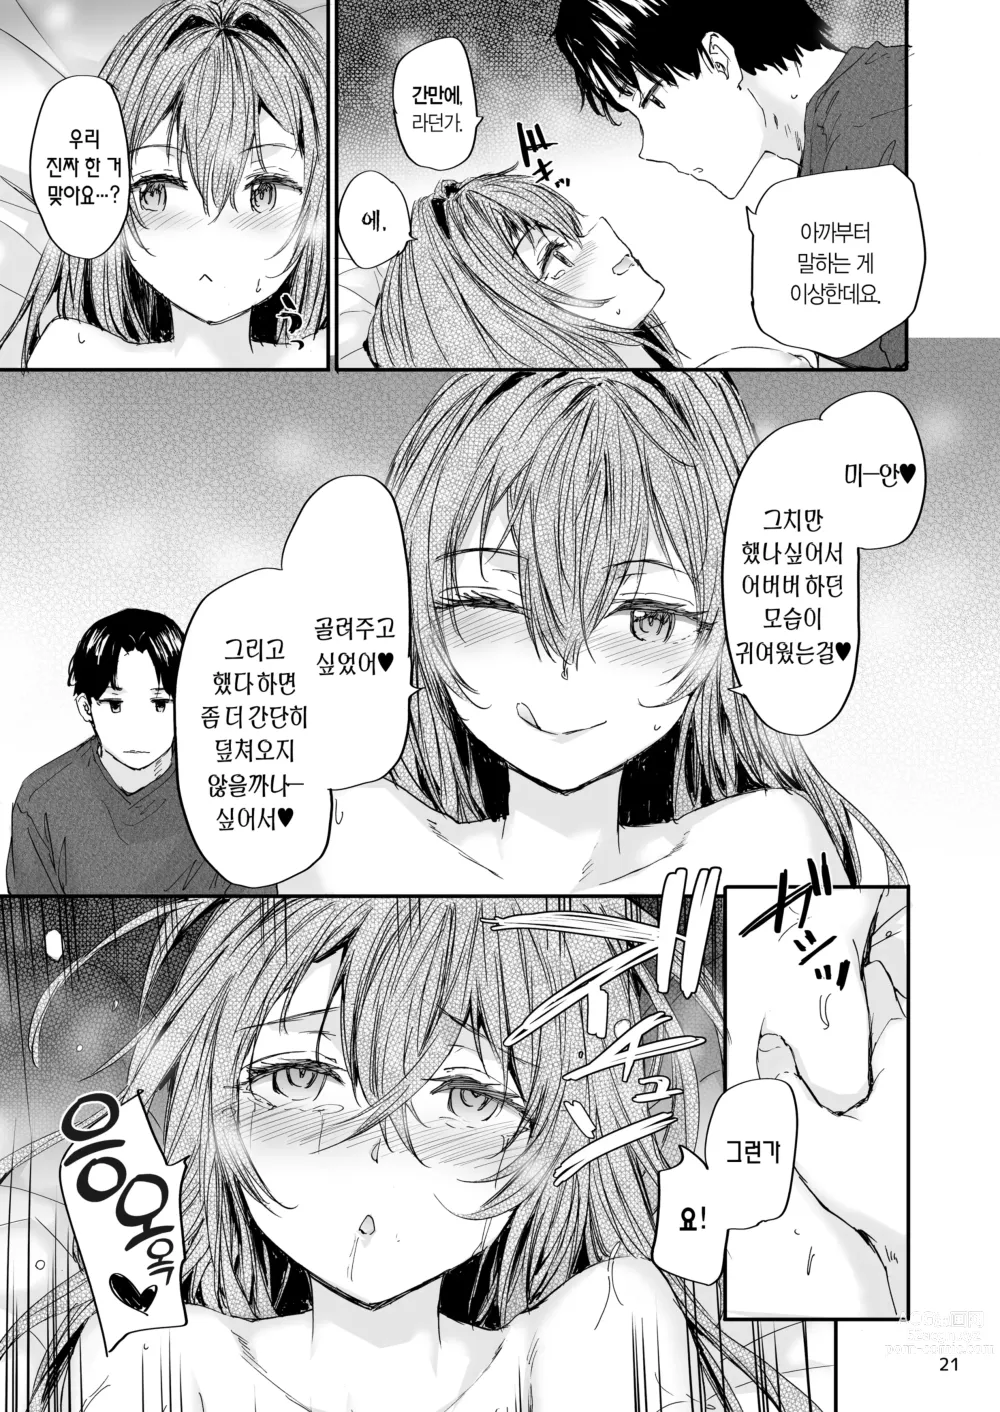 Page 22 of doujinshi 대물림 섹스 프렌드 Another 2